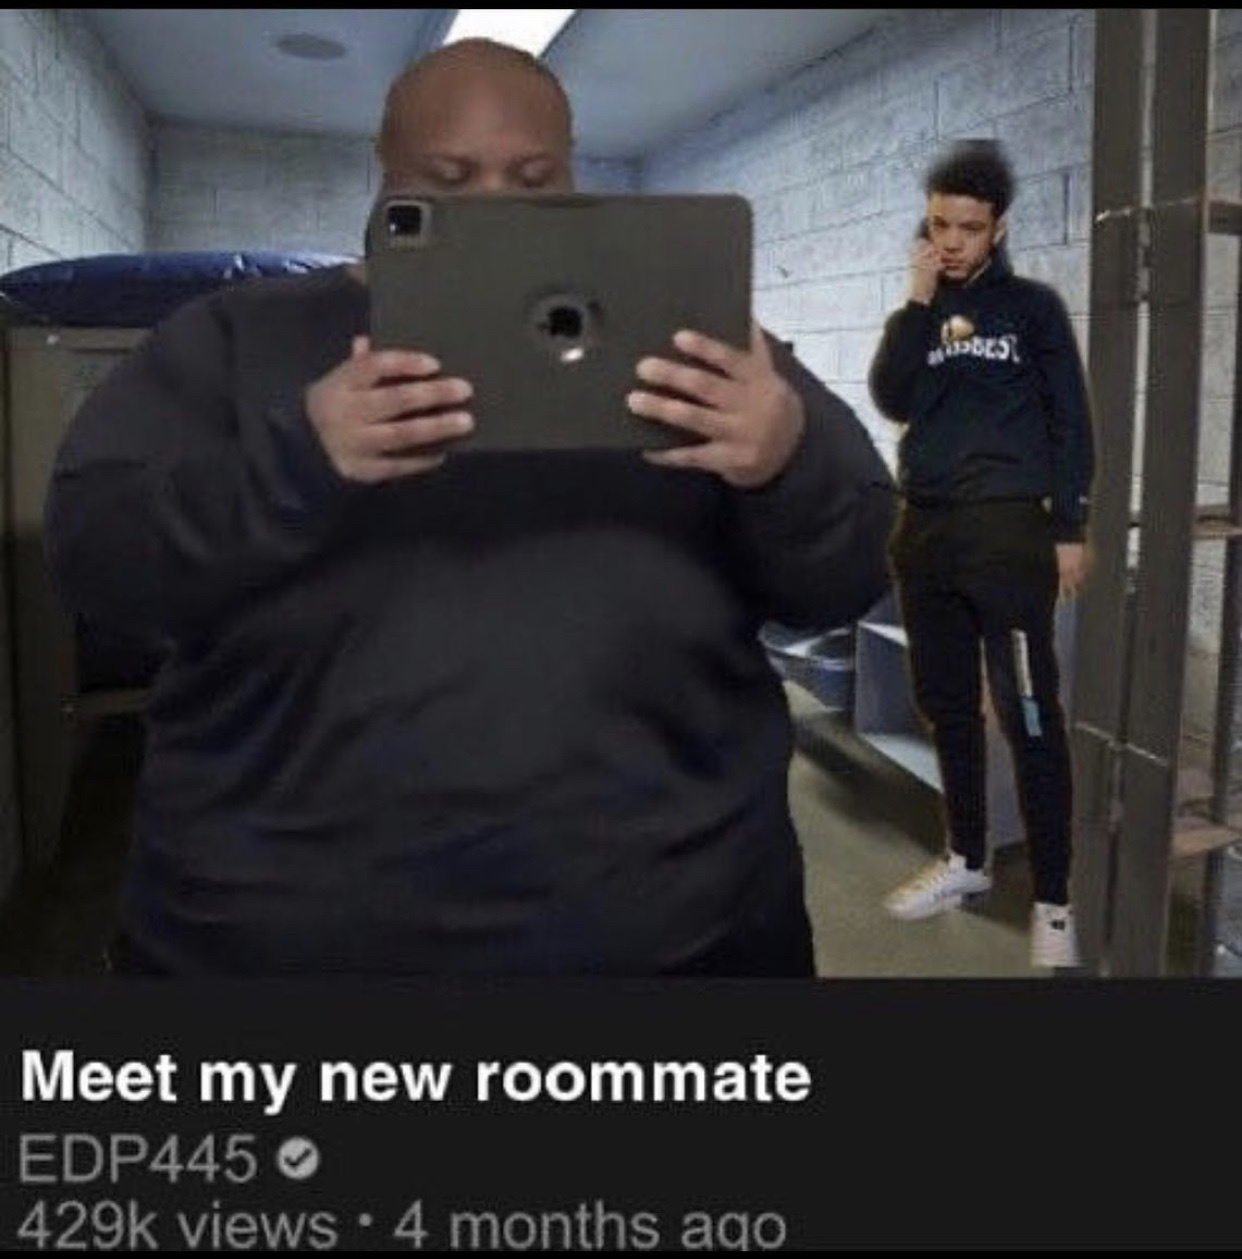 edp445 and lil mosey I think - meme